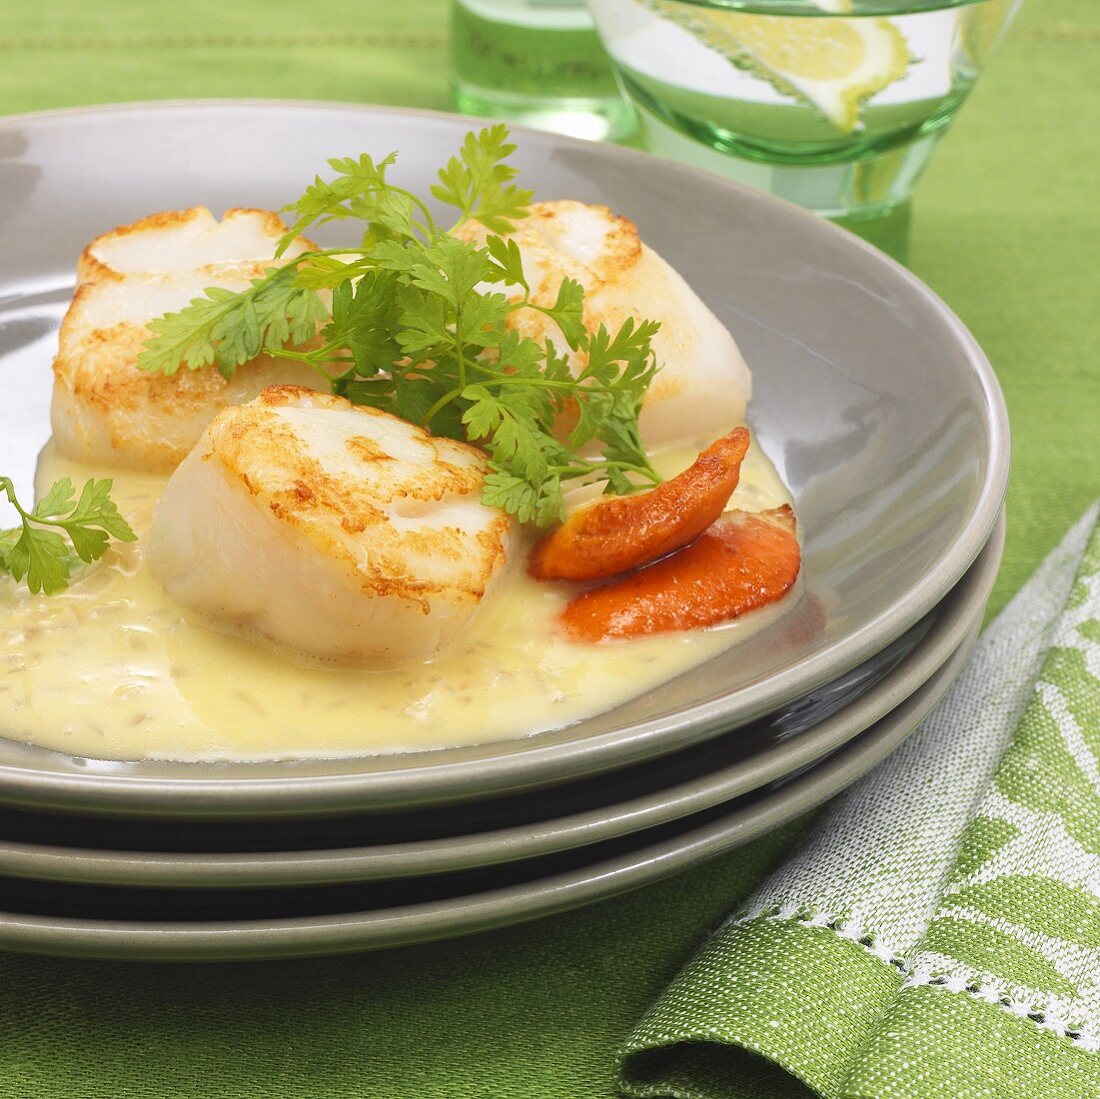 Scallops with butter sauce